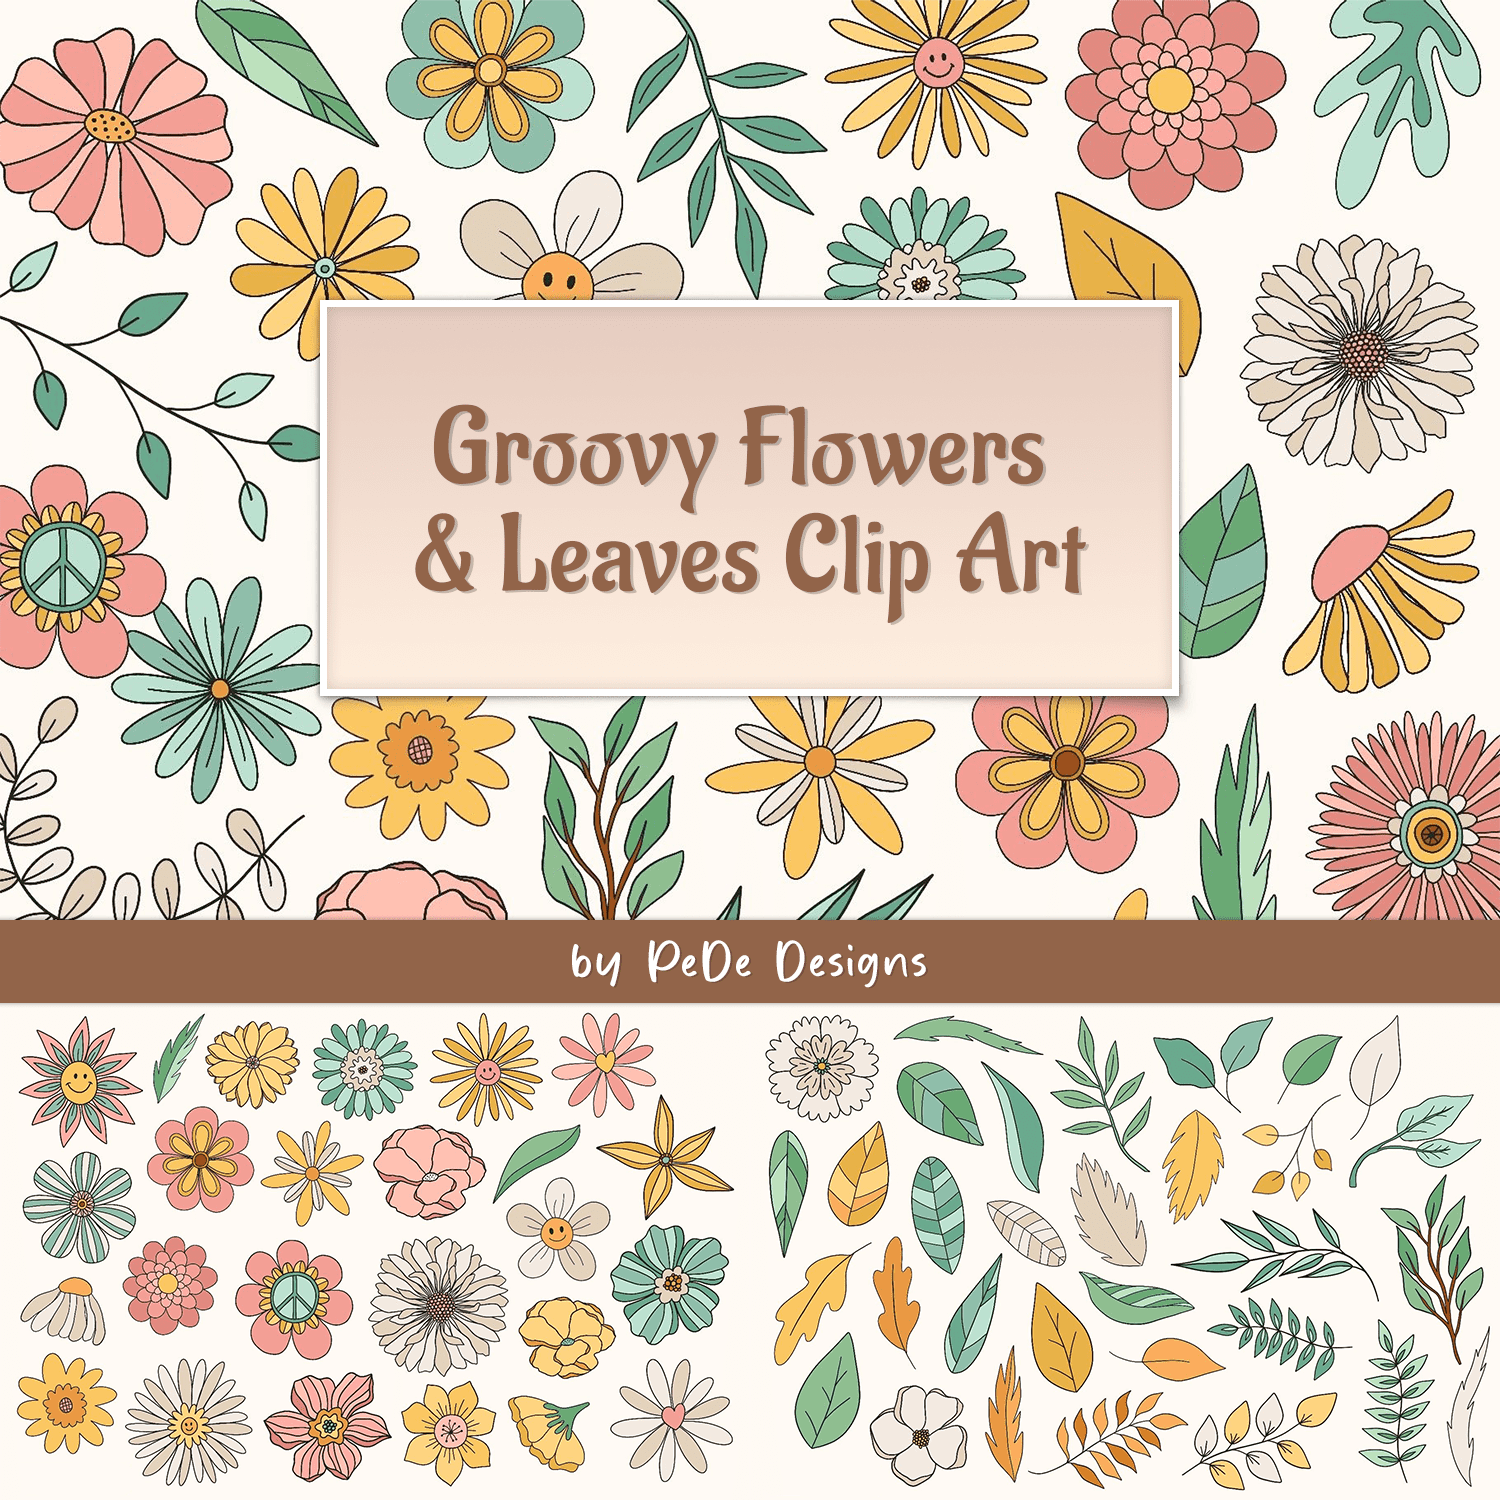 Groovy Flowers & Leaves Clip Art cover.